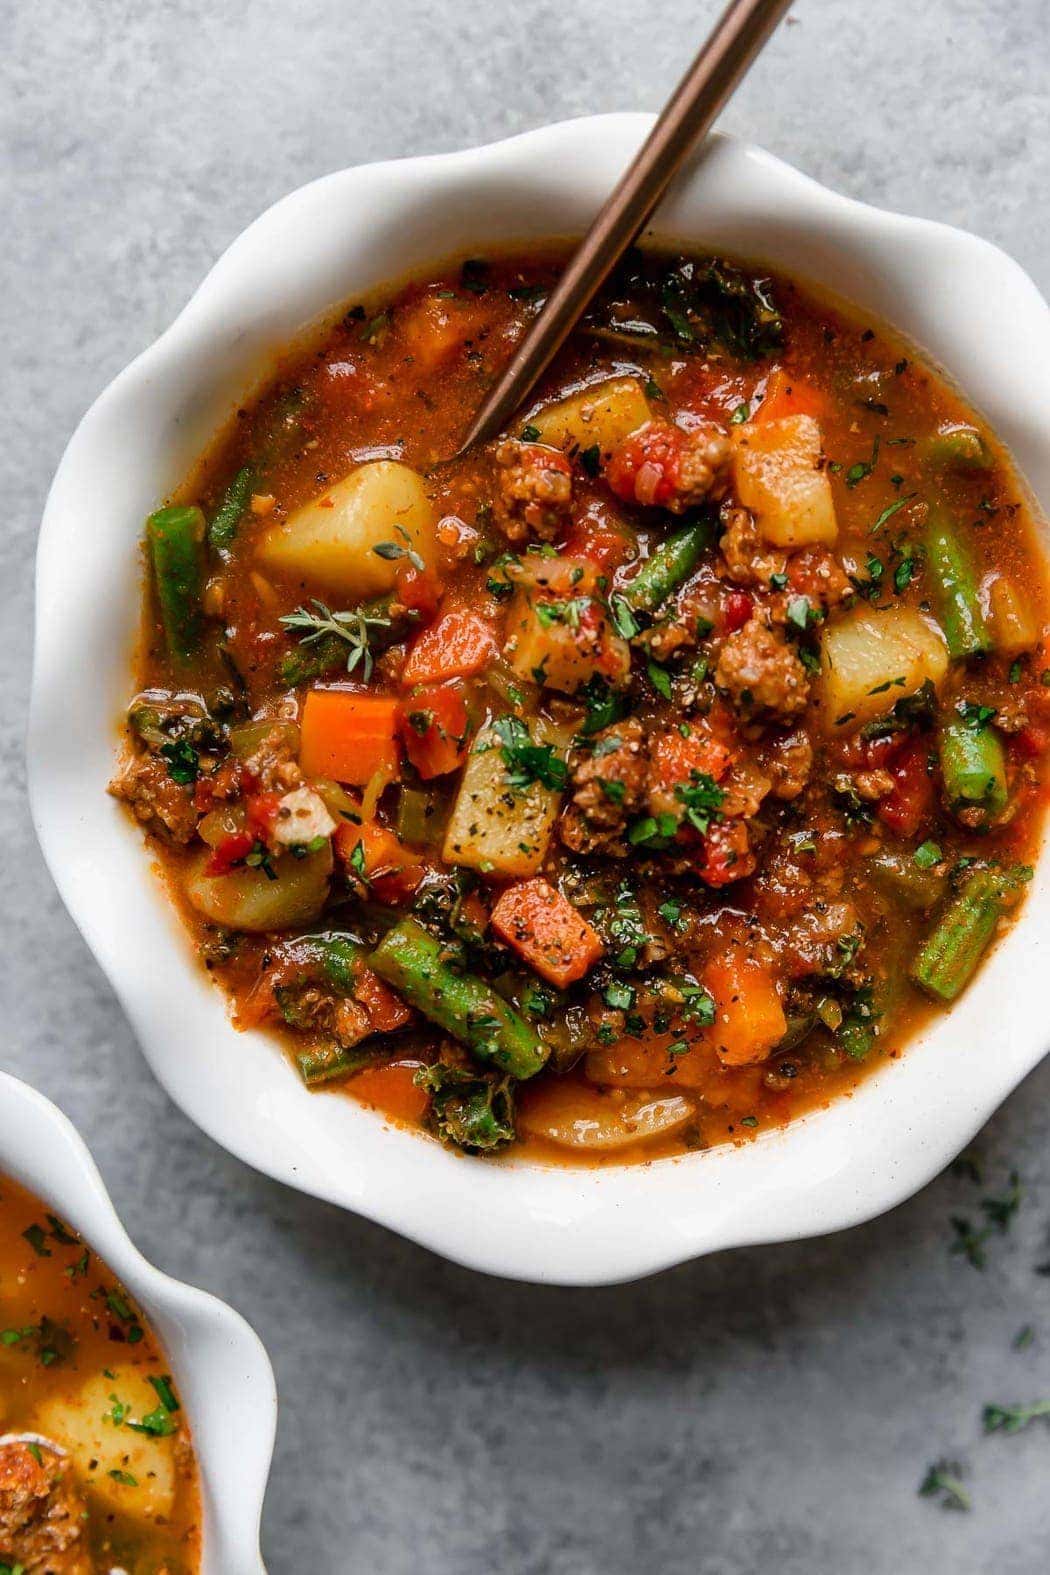 https://therealfooddietitians.com/wp-content/uploads/2021/08/Slow-Cooker-Healthy-Hamburger-Soup-6.jpeg